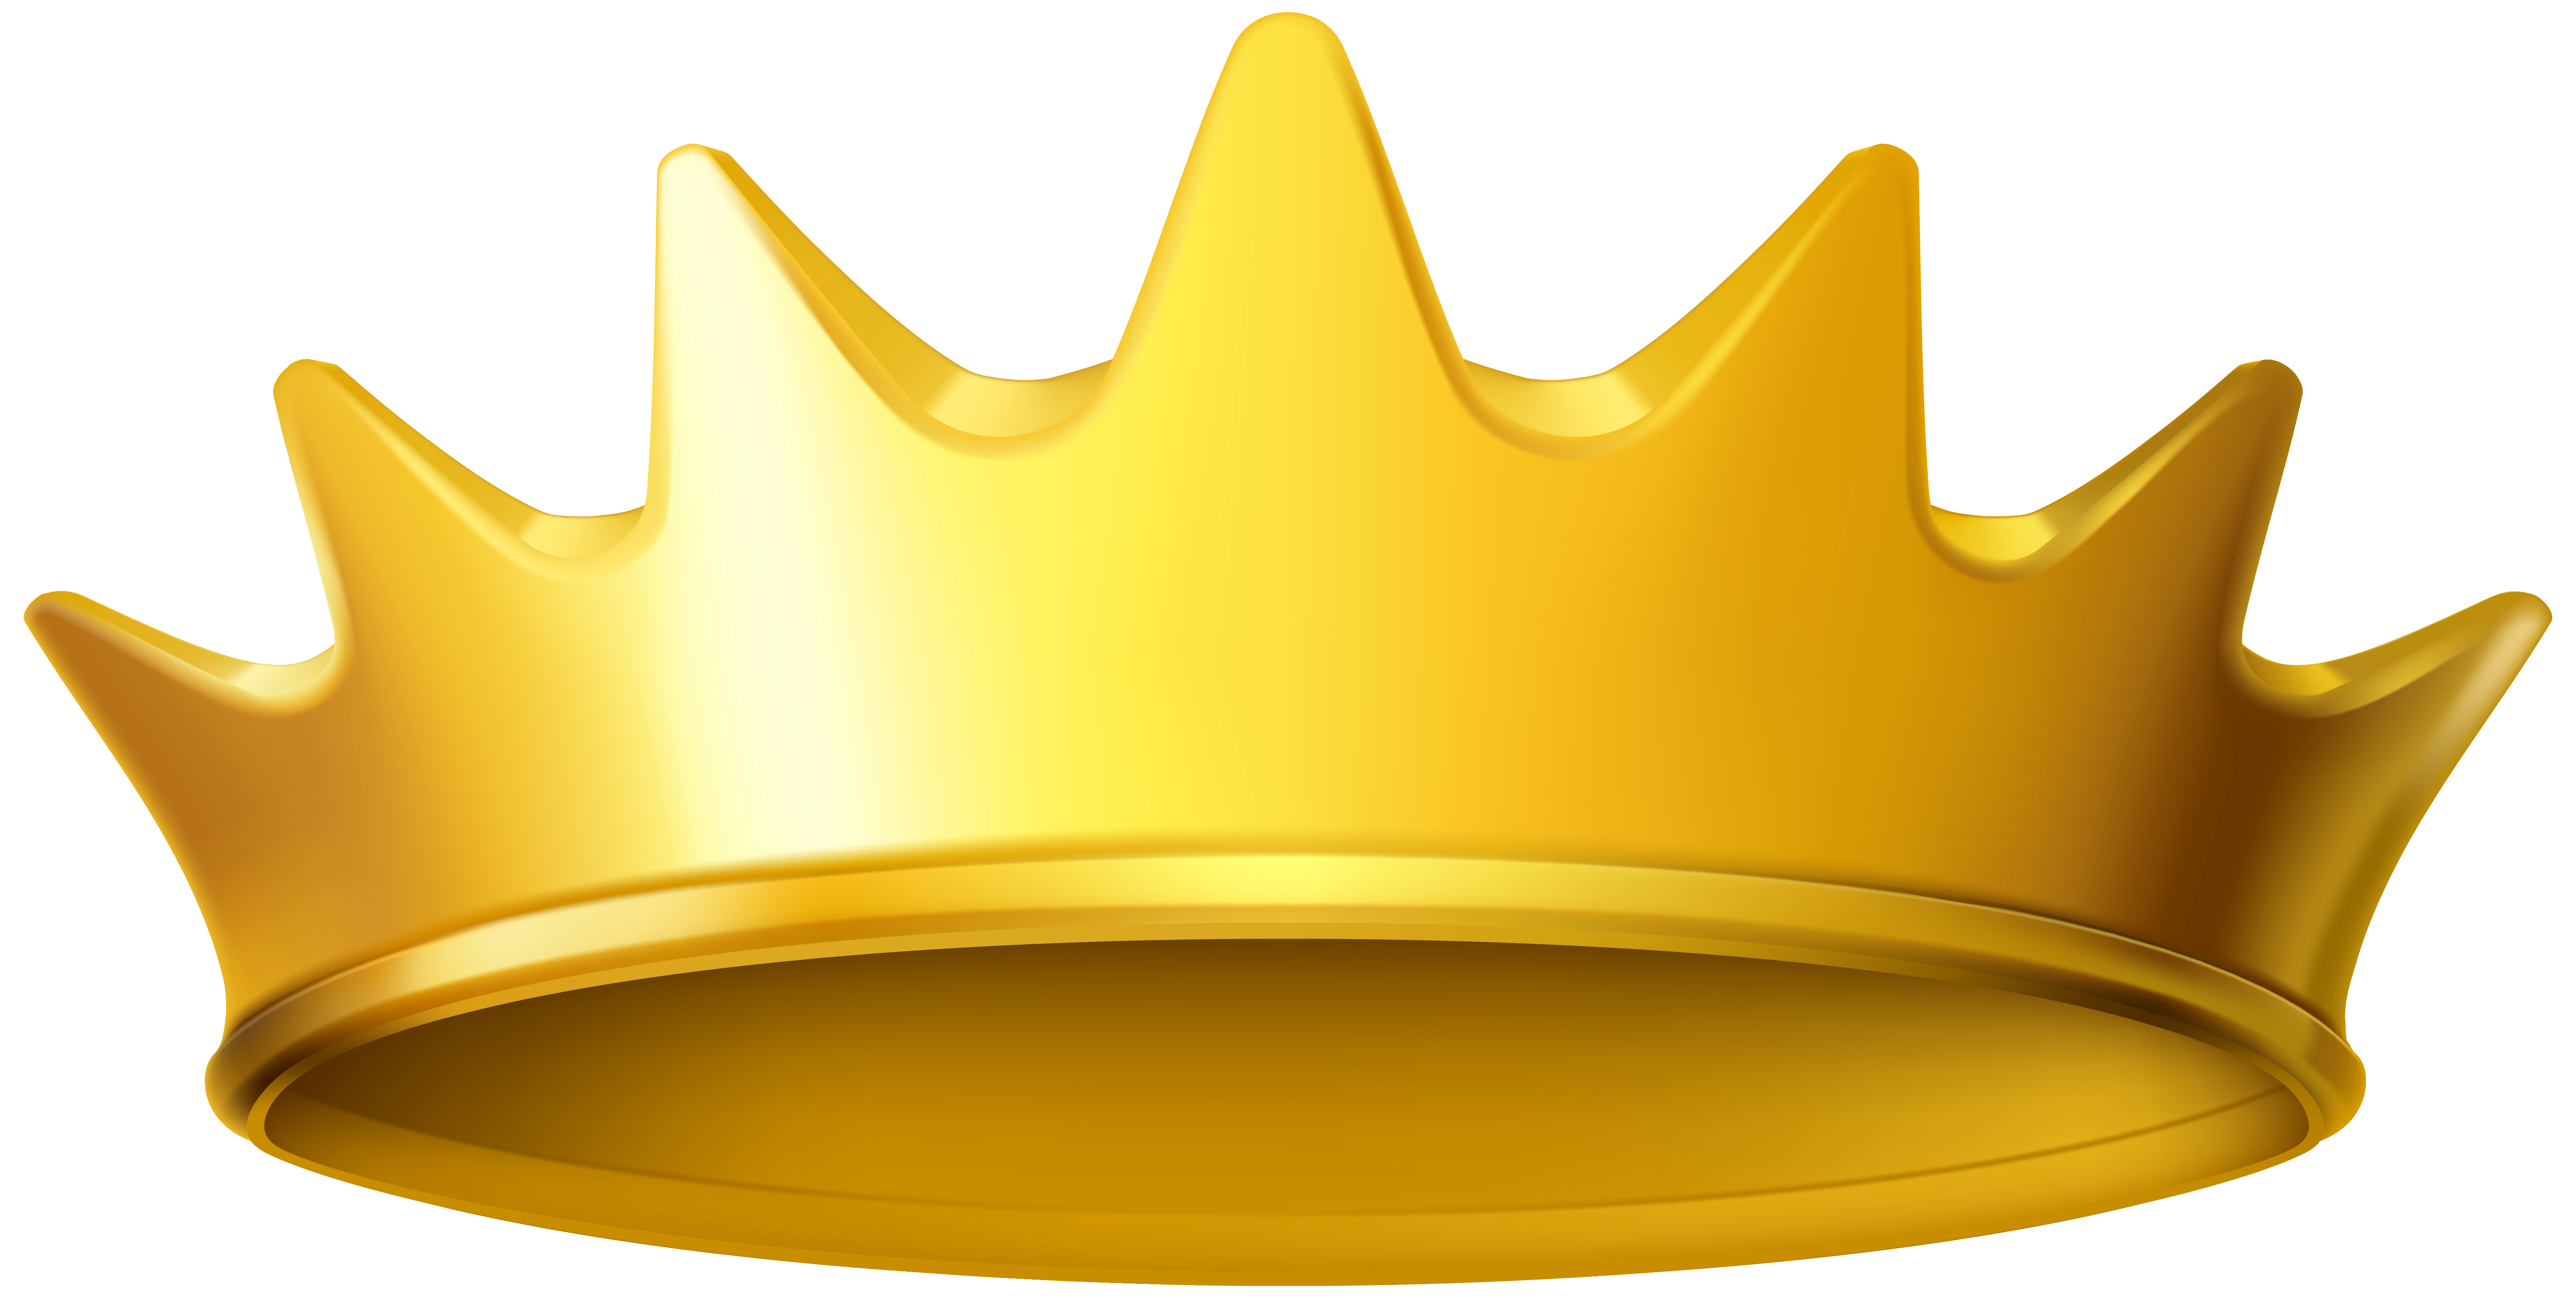 Gold crown clipart no background